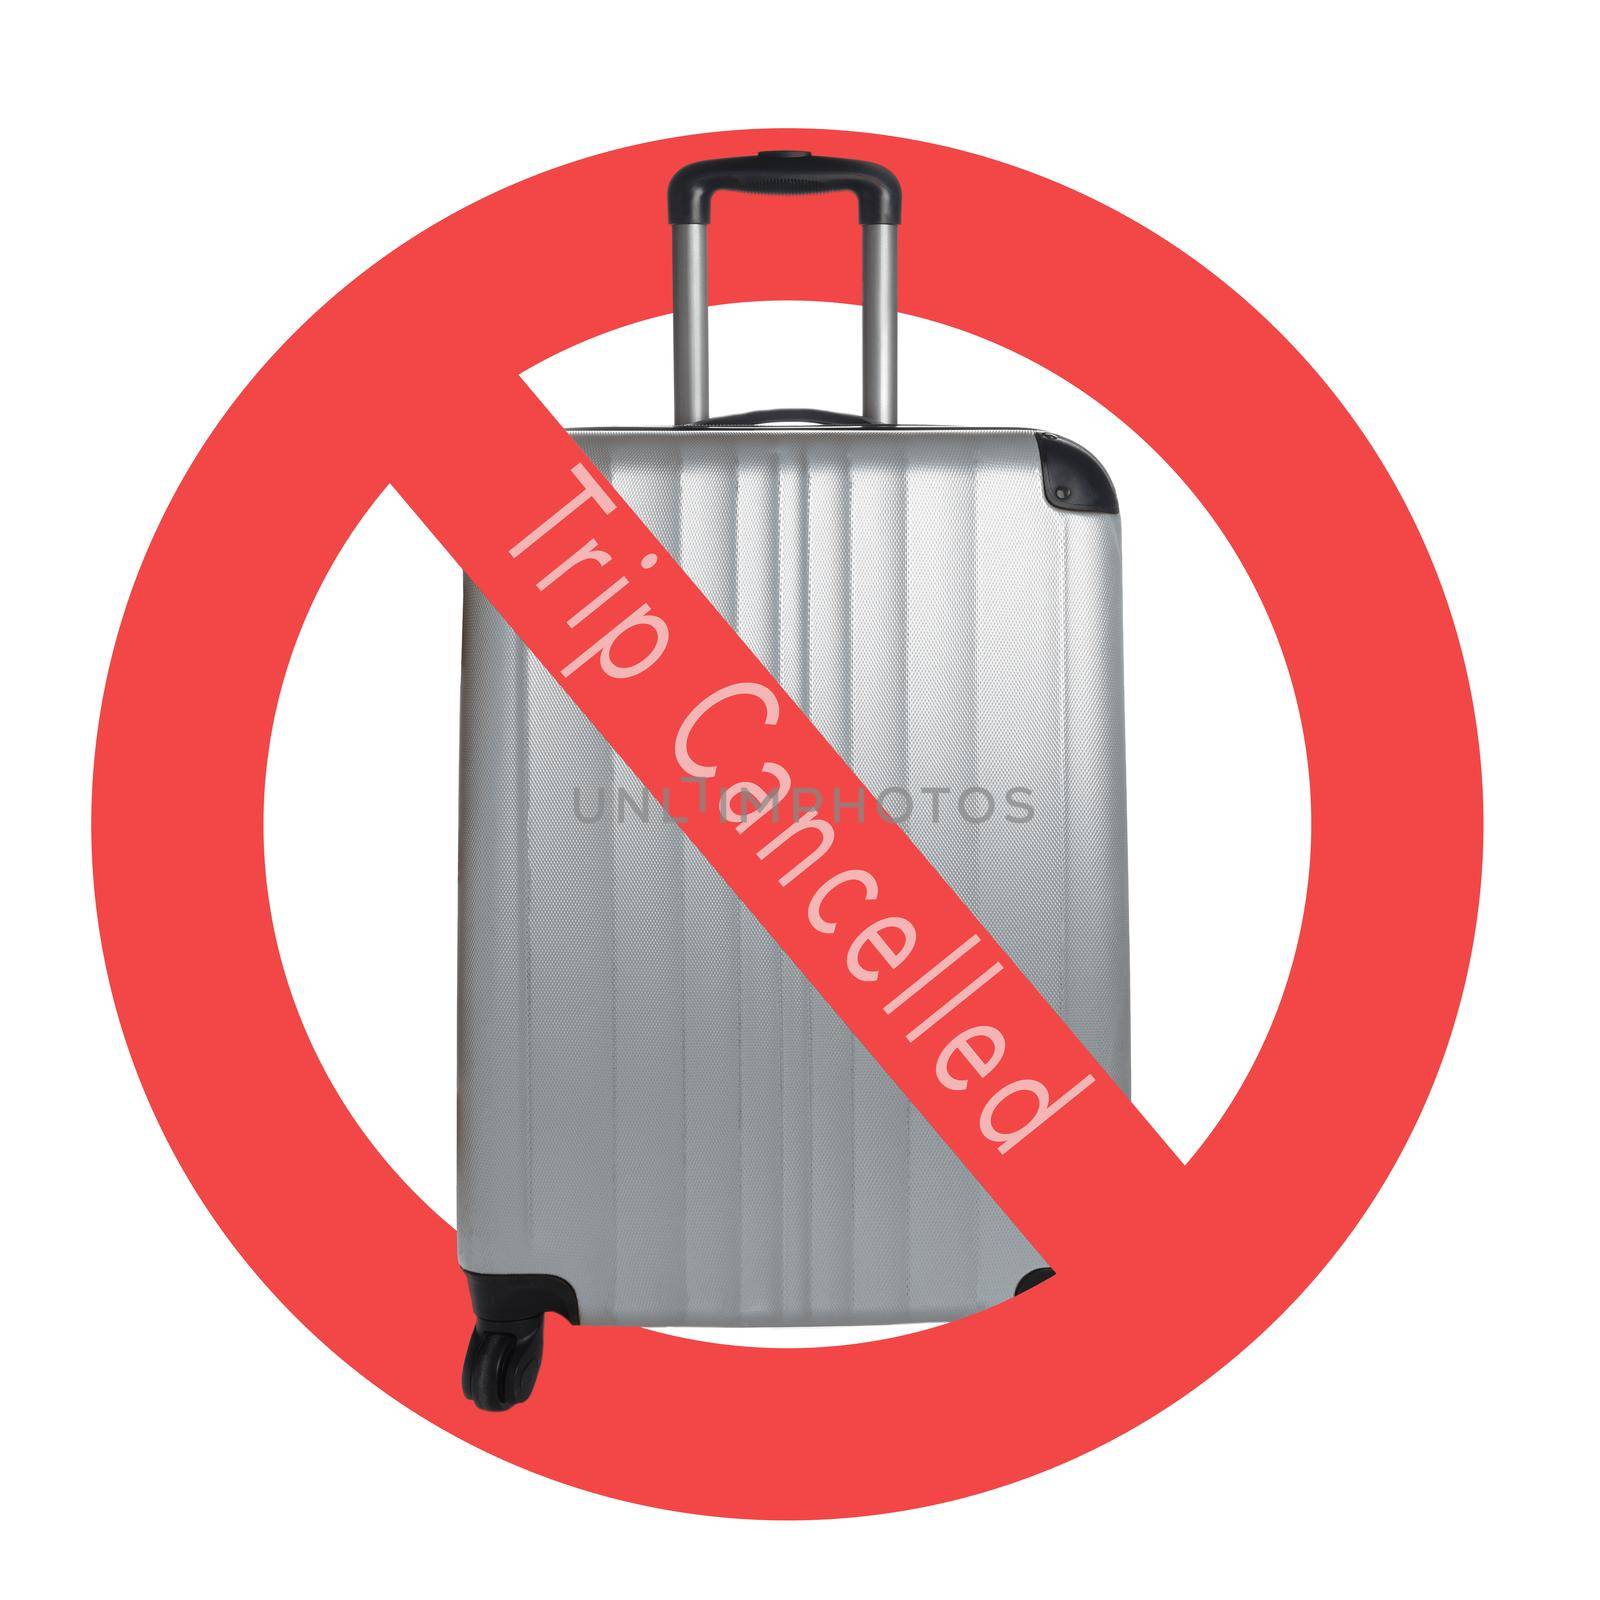 Silver Suitcase on a white background with international no symbol and Trip Cancelled. Tourism restrictions concept during pandemic.